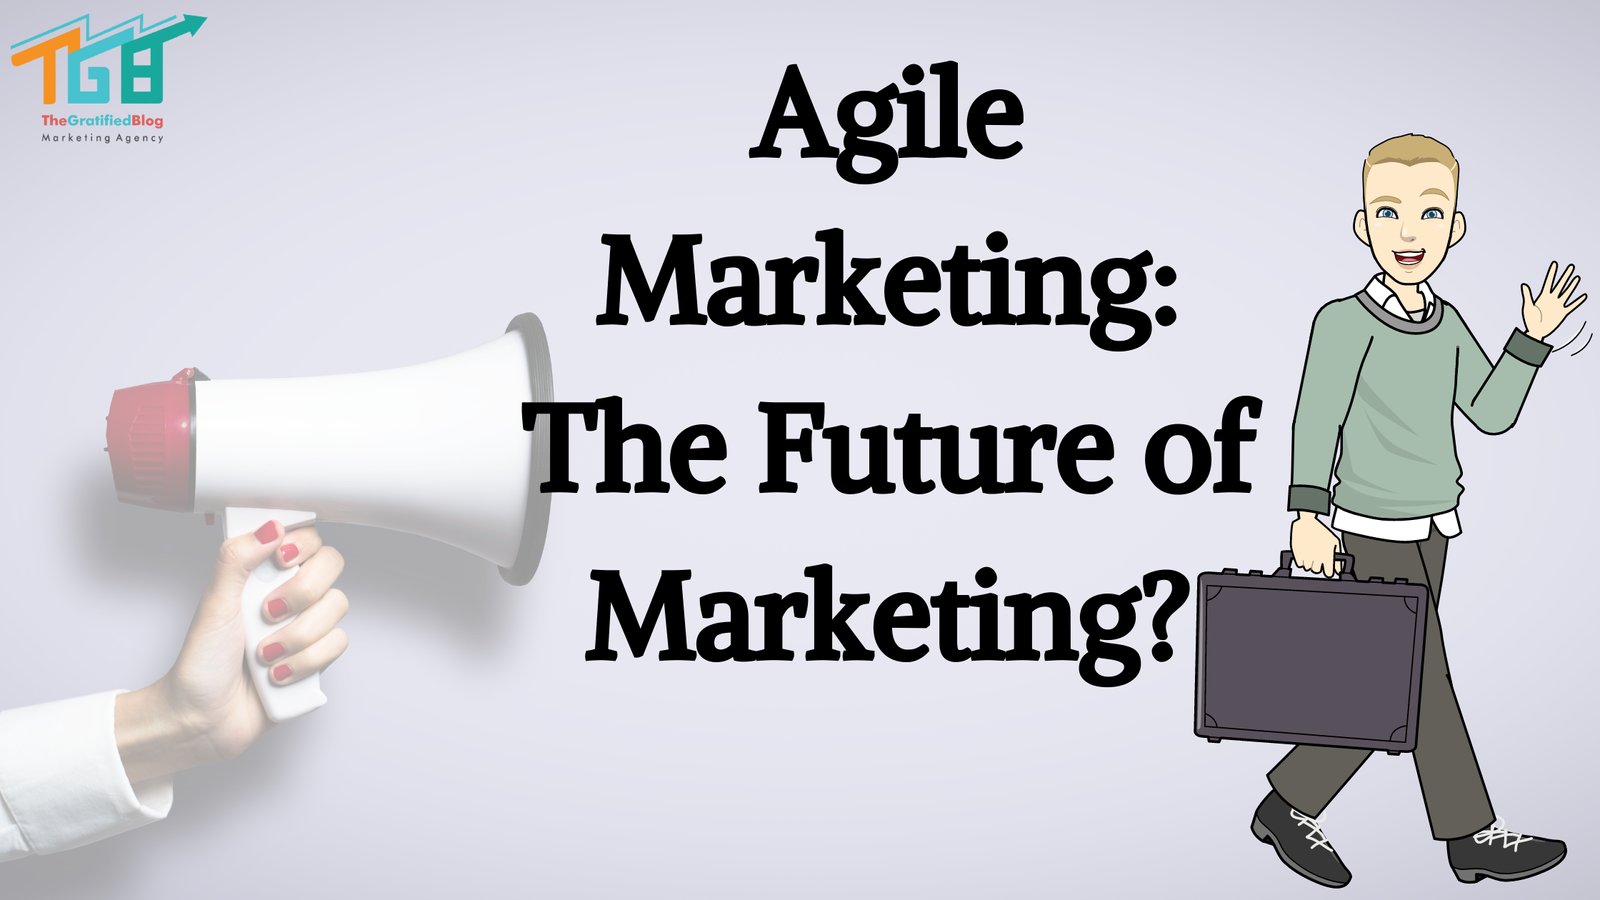 what is agile marketing